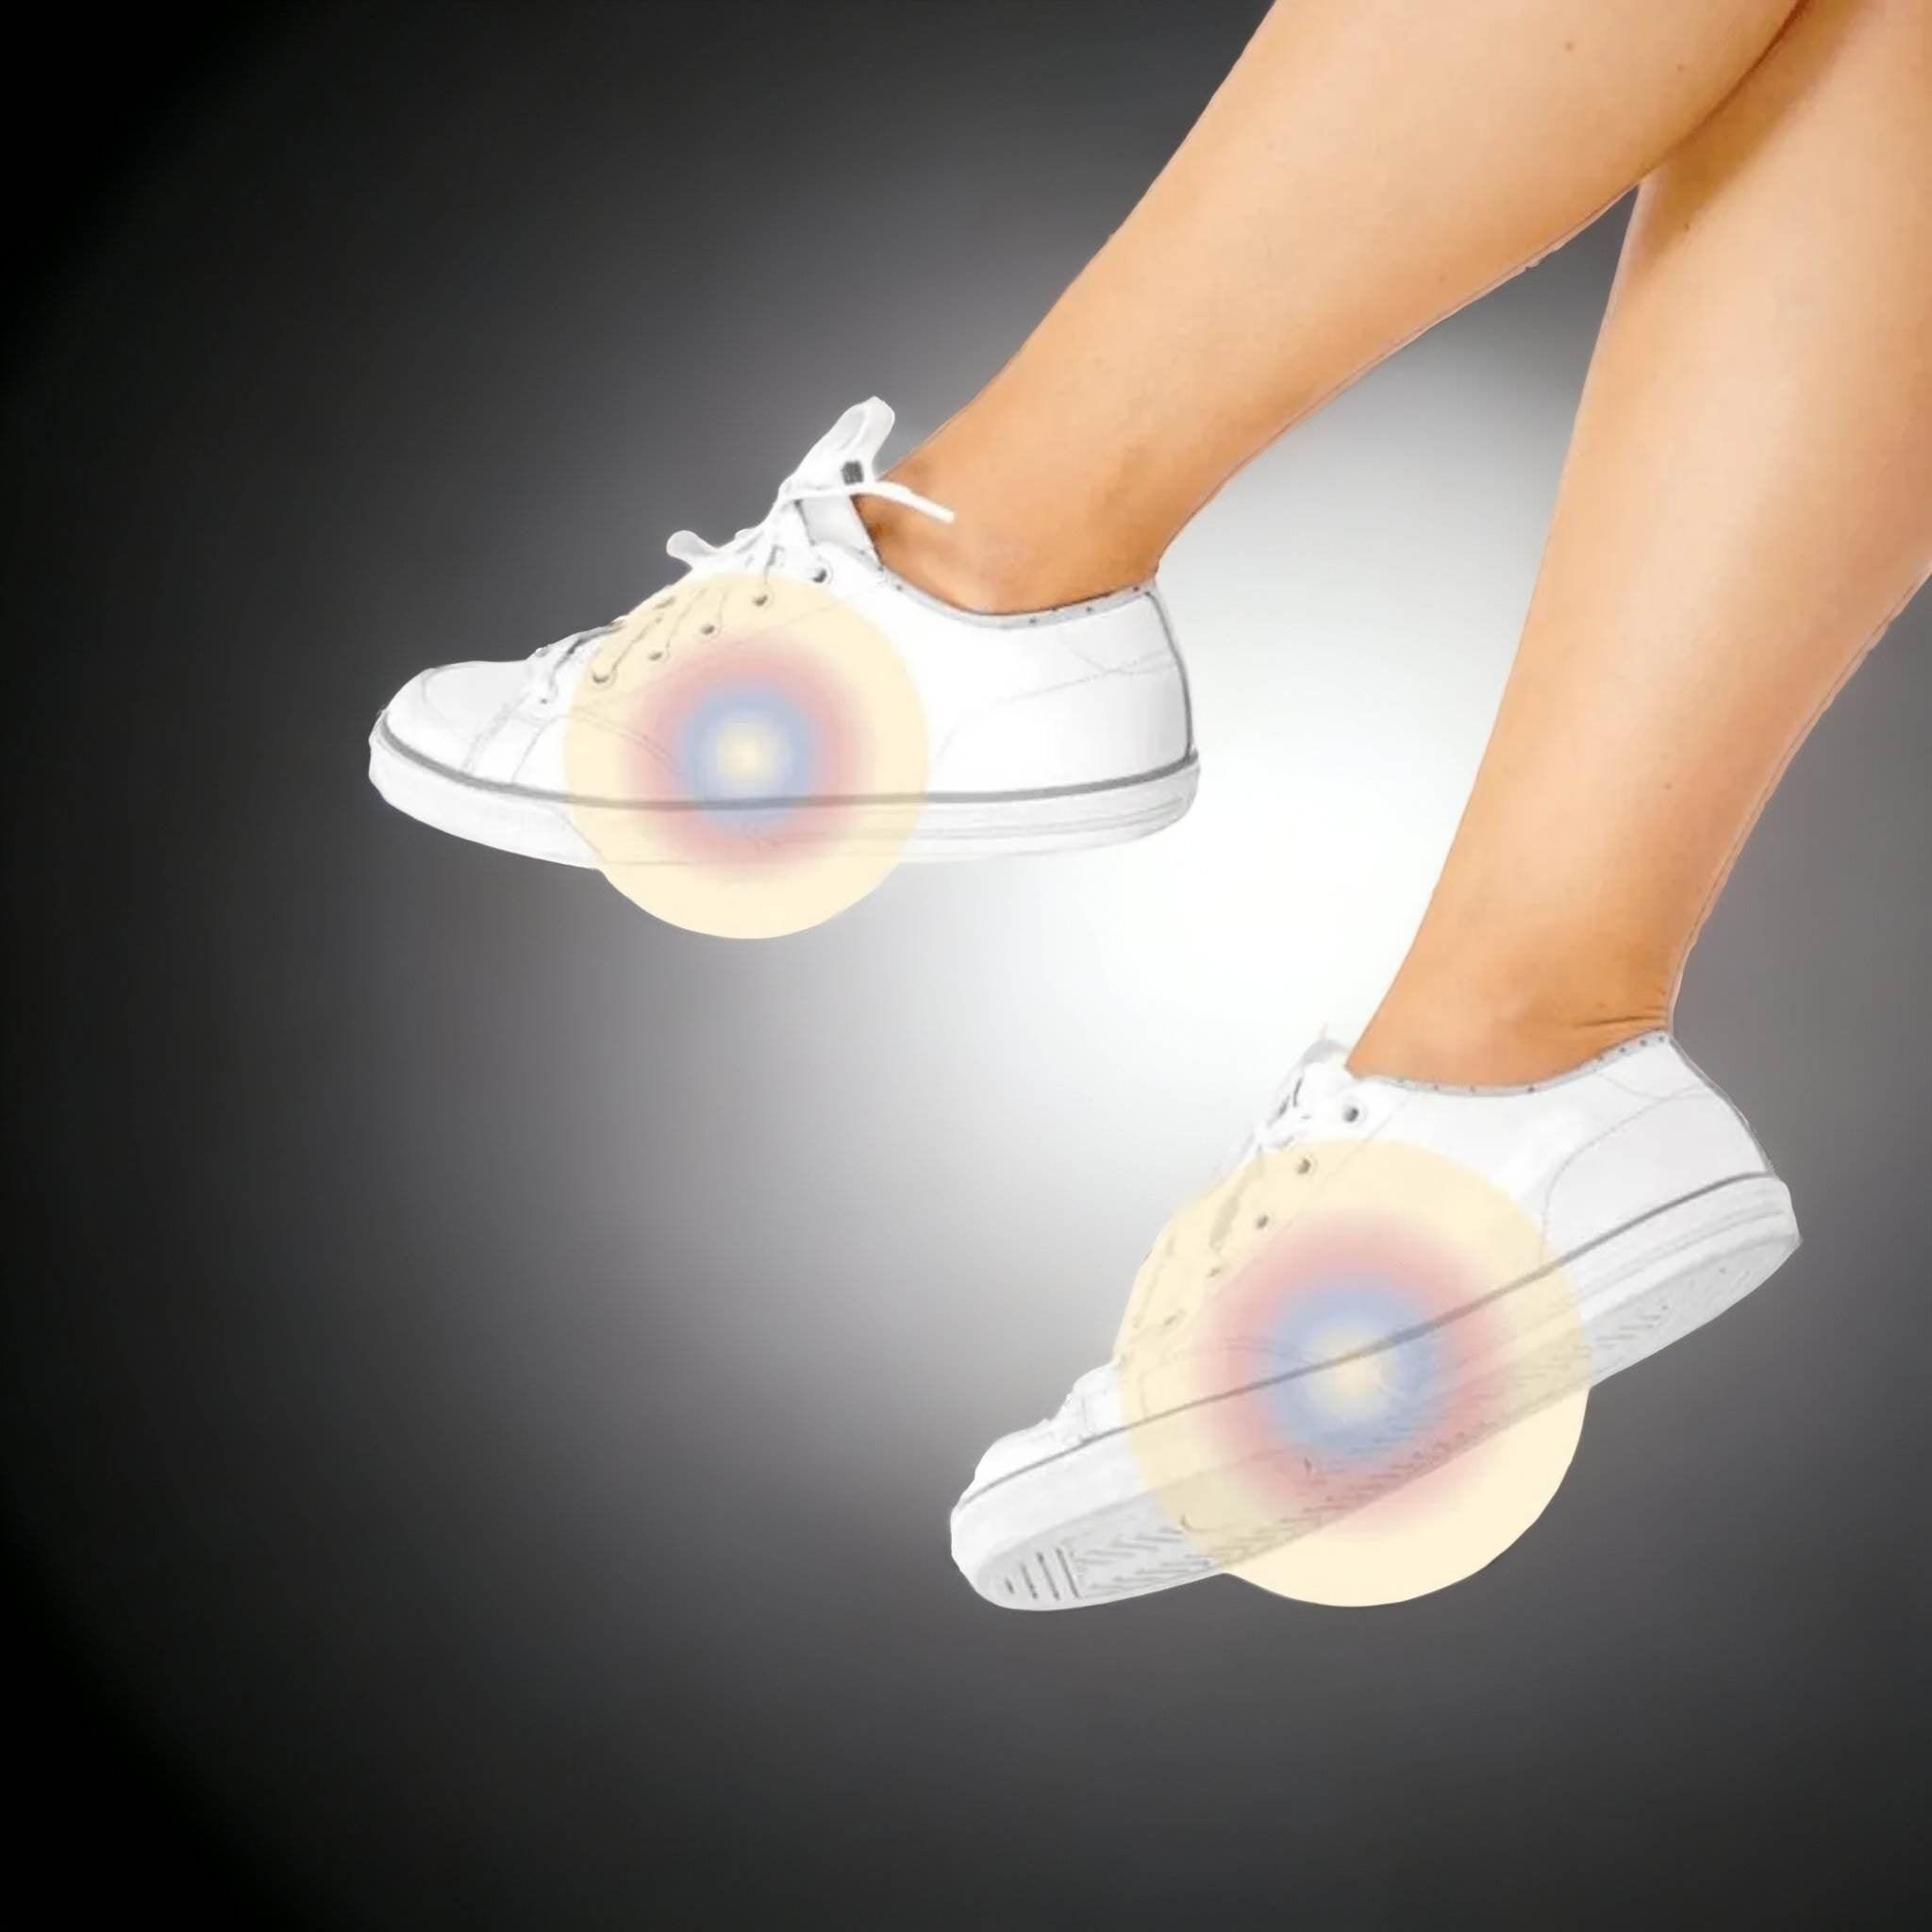 Orgone Energy Shoe Soles for EMF protection